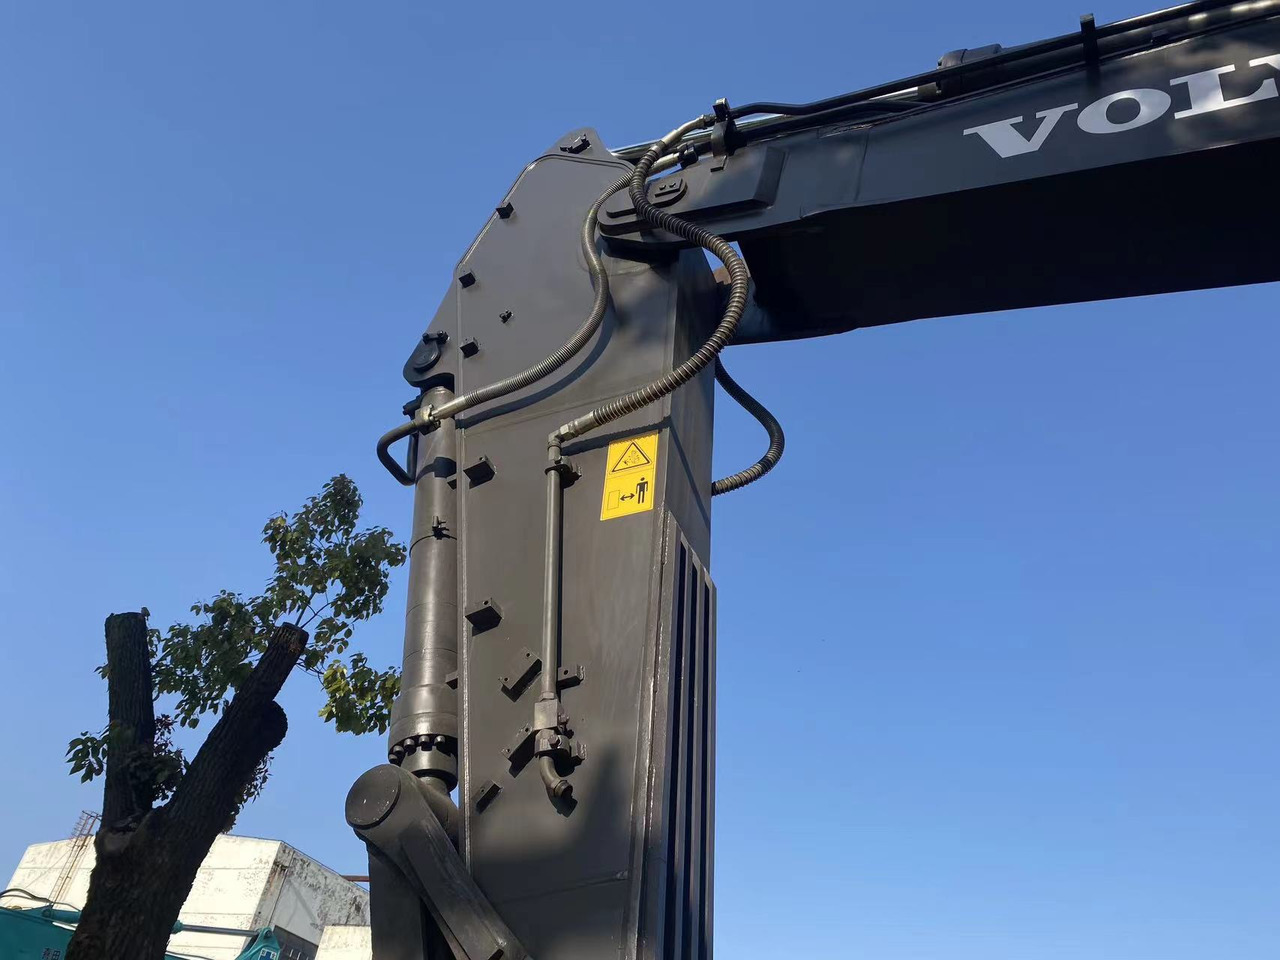 Hot selling original made Used excavator VOLVO EC480DL in stock low price for sale lizing Hot selling original made Used excavator VOLVO EC480DL in stock low price for sale: slika 9